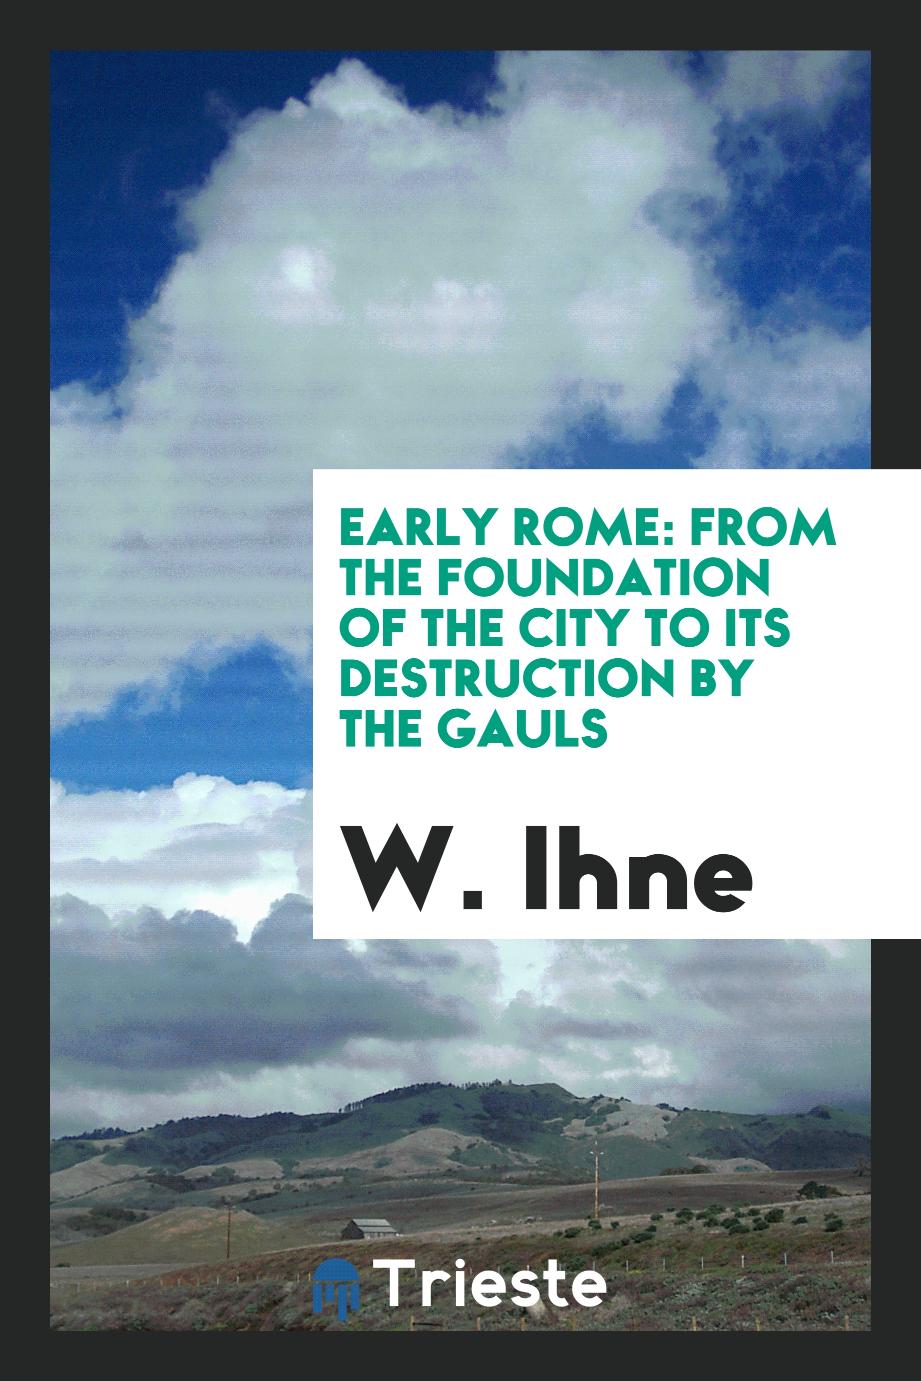 Early Rome: from the foundation of the city to its destruction by the Gauls